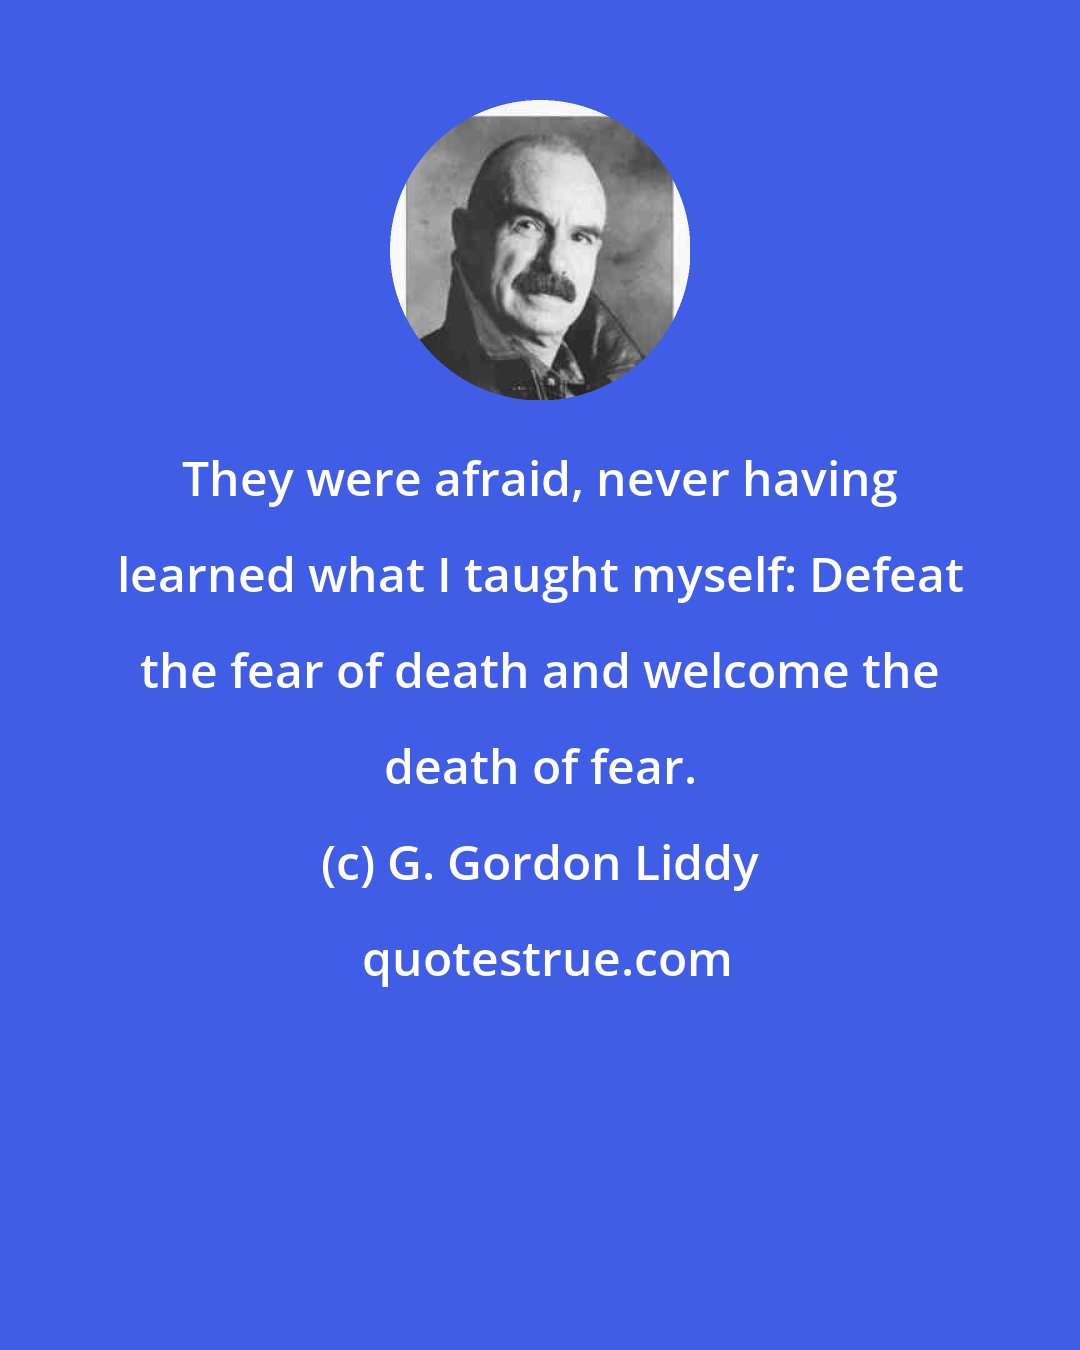 G. Gordon Liddy: They were afraid, never having learned what I taught myself: Defeat the fear of death and welcome the death of fear.